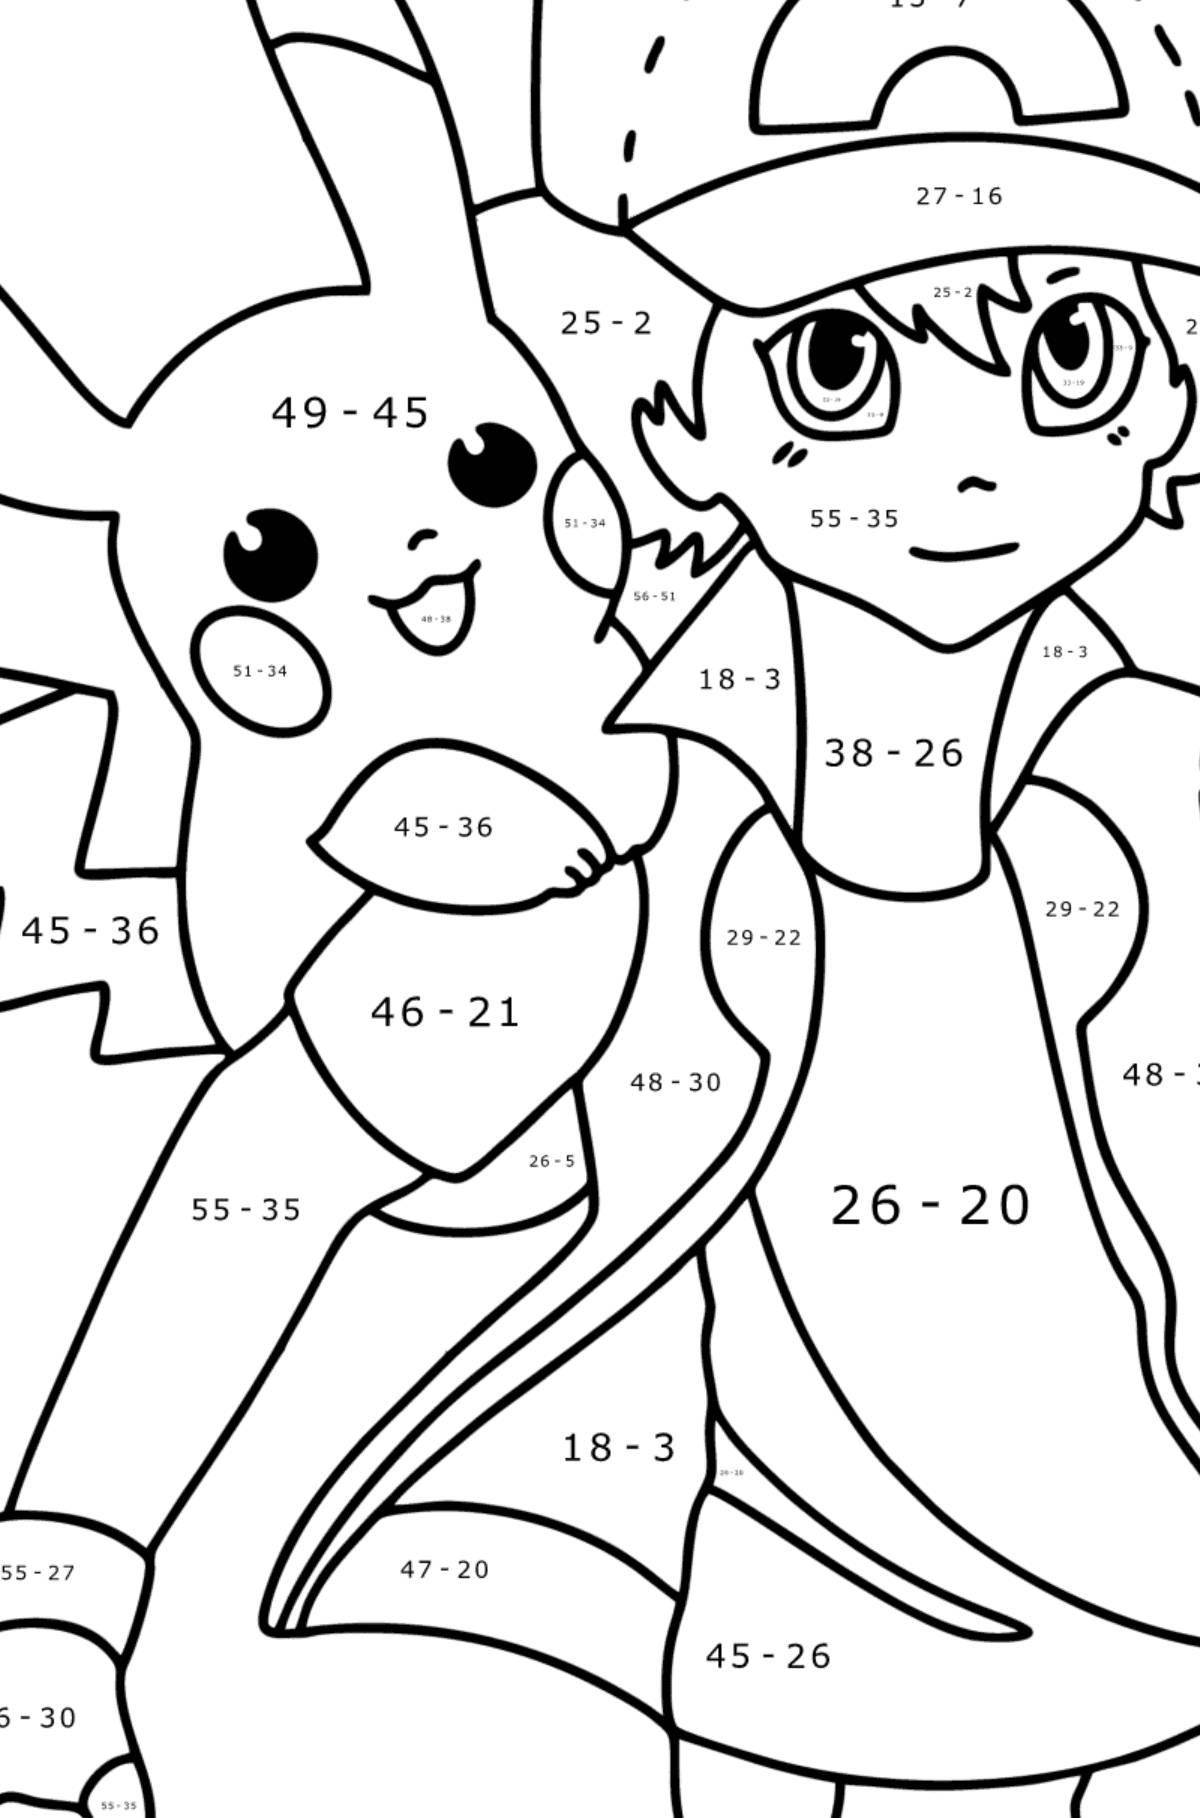 Pikachu funny numbers coloring page